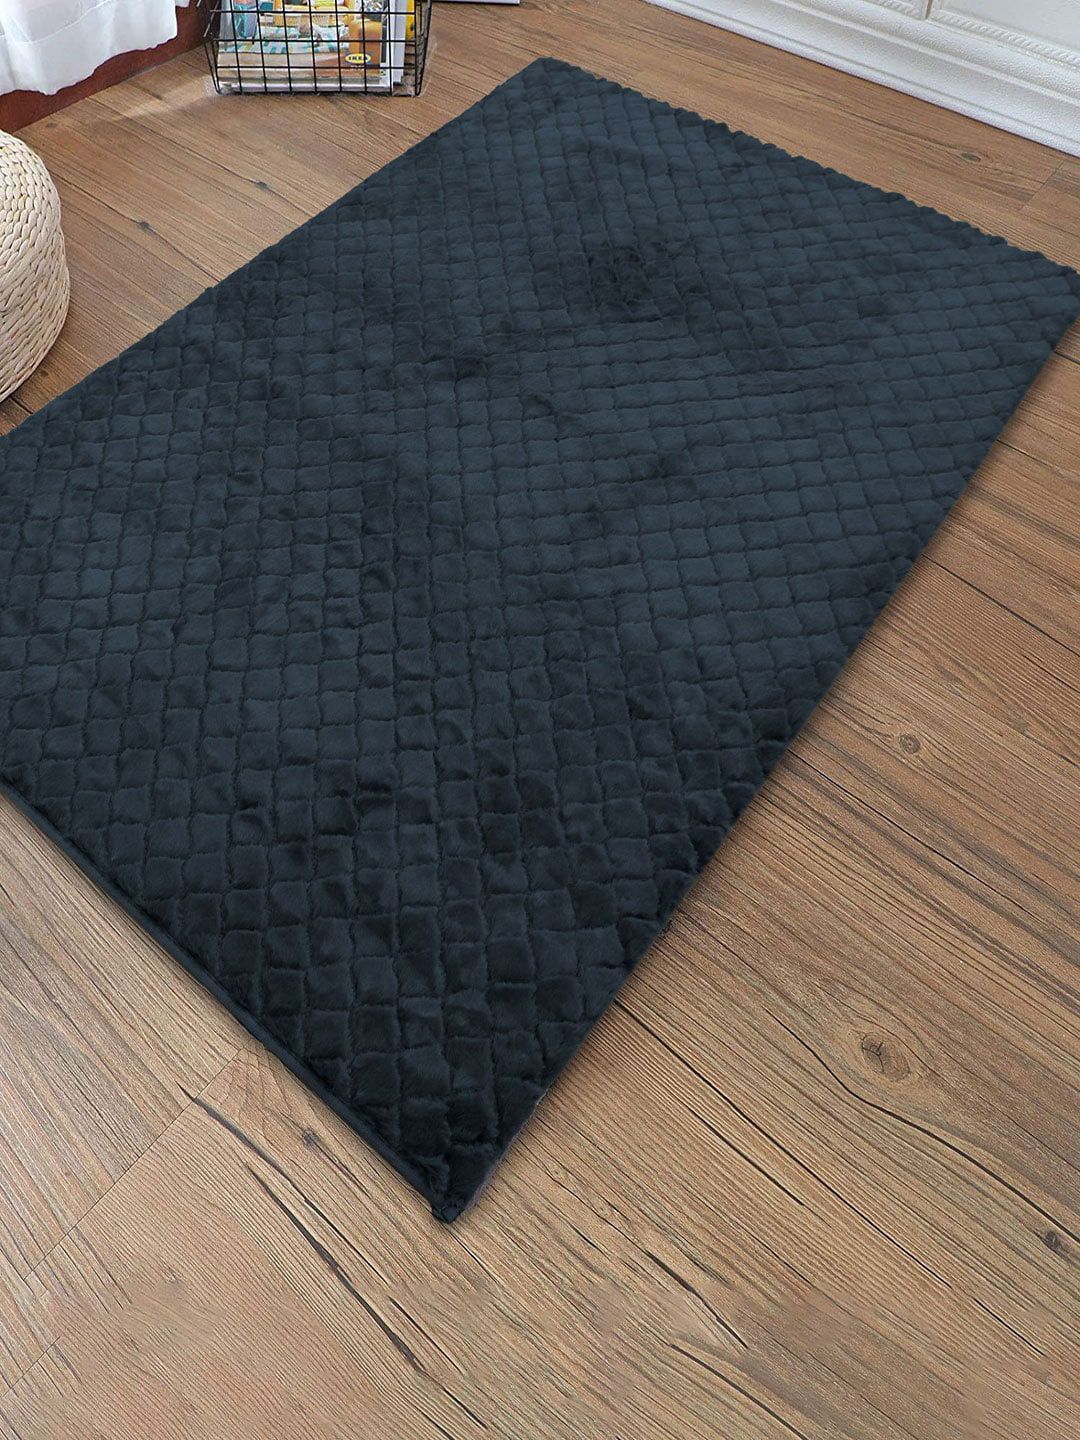 LUXEHOME INTERNATIONAL Black Solid Antiskid Austria Carpets Price in India